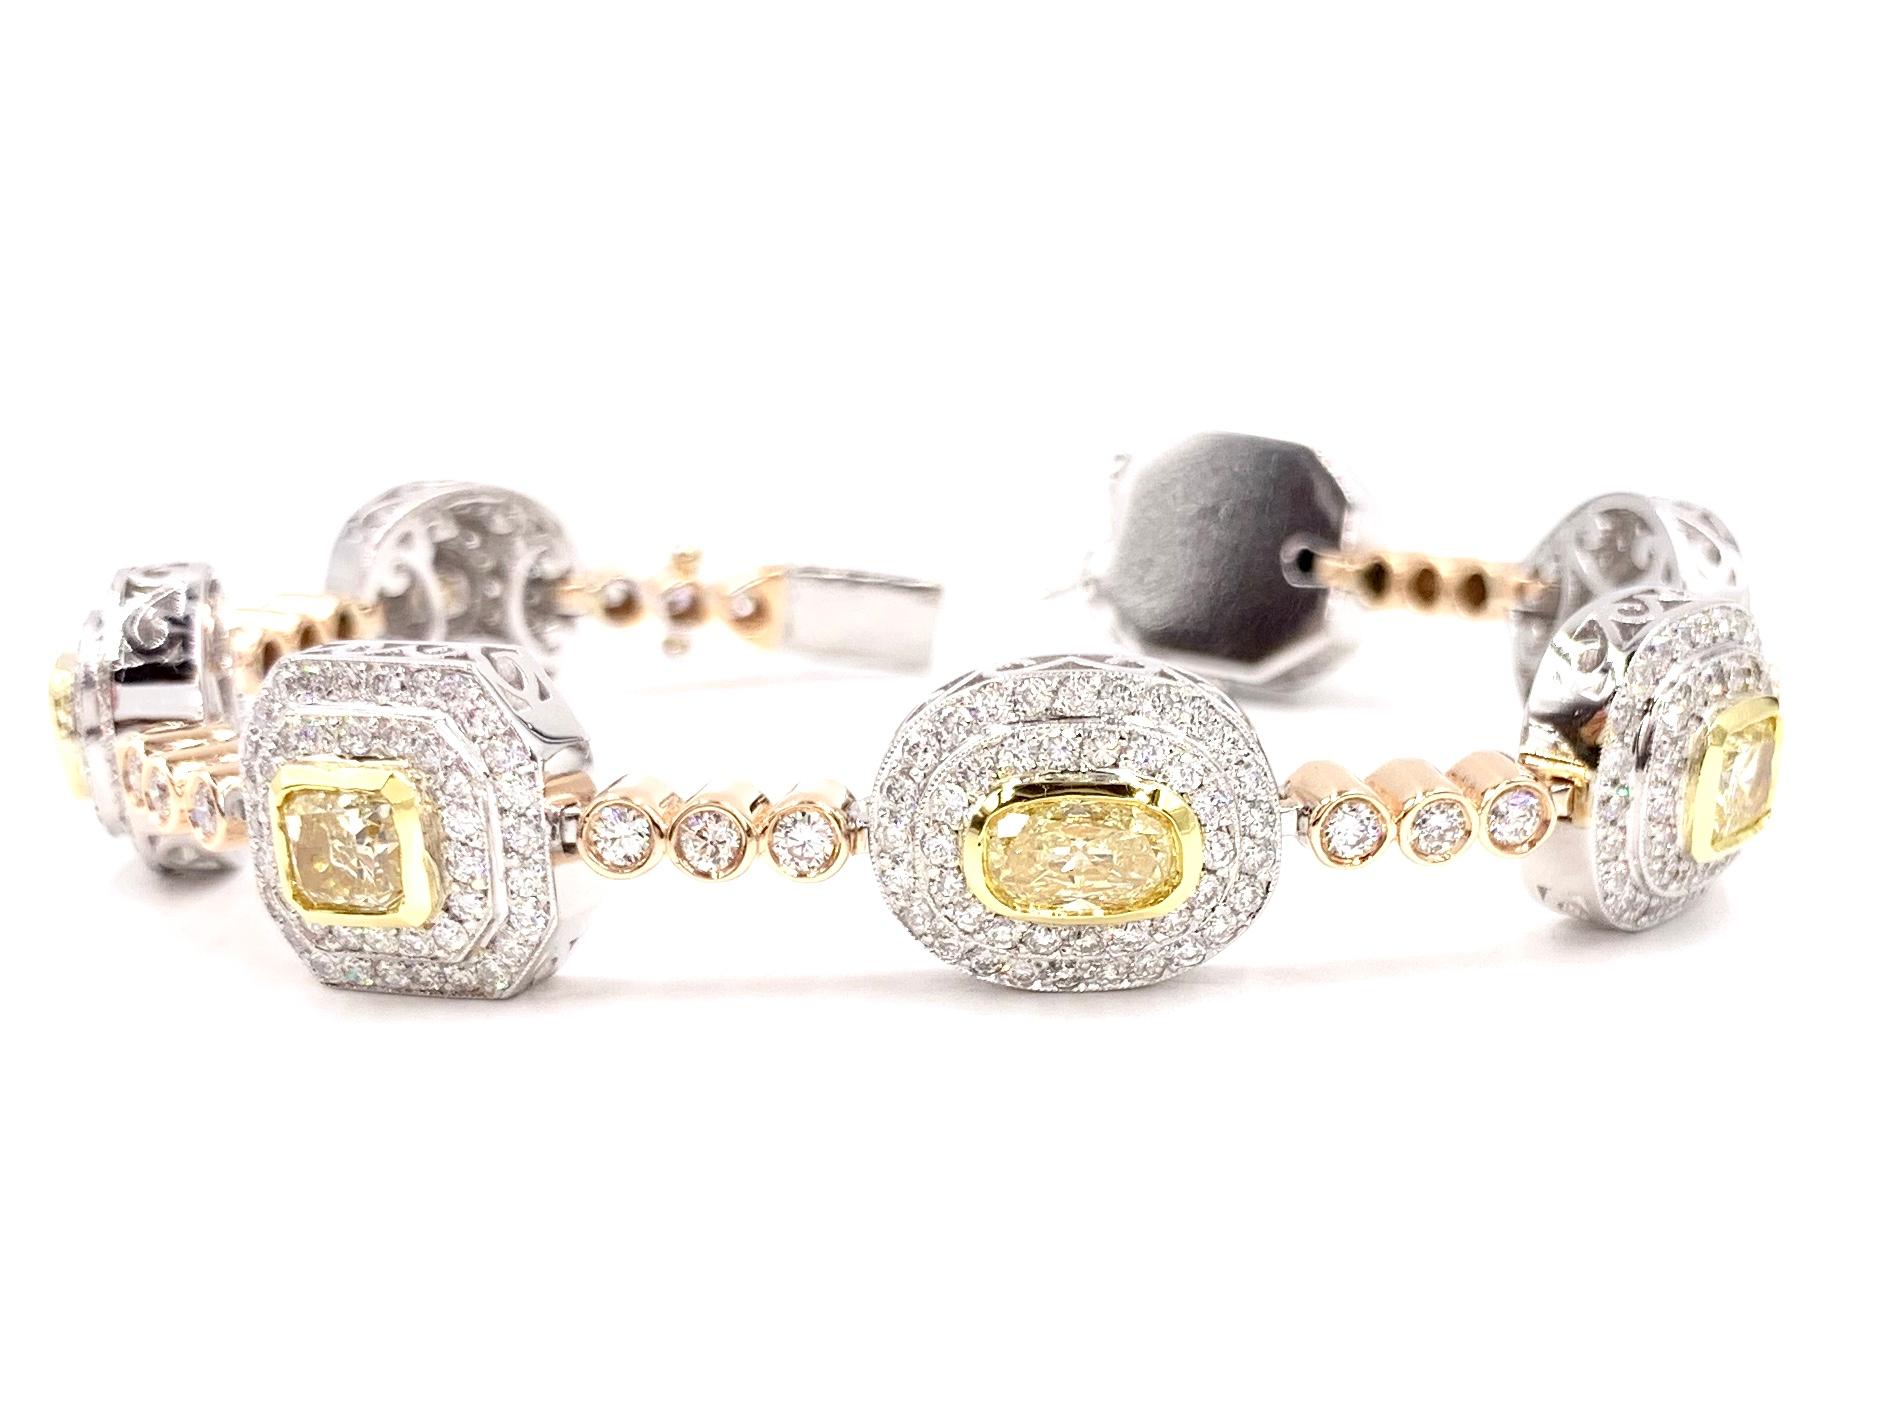 An exquisite white and fancy yellow diamond bracelet, beautifully incorporating 18 karat white, rose and yellow gold with 12.30 diamond carat total weight. This unique bracelet features four different fancy shapes of yellow diamonds surrounded by